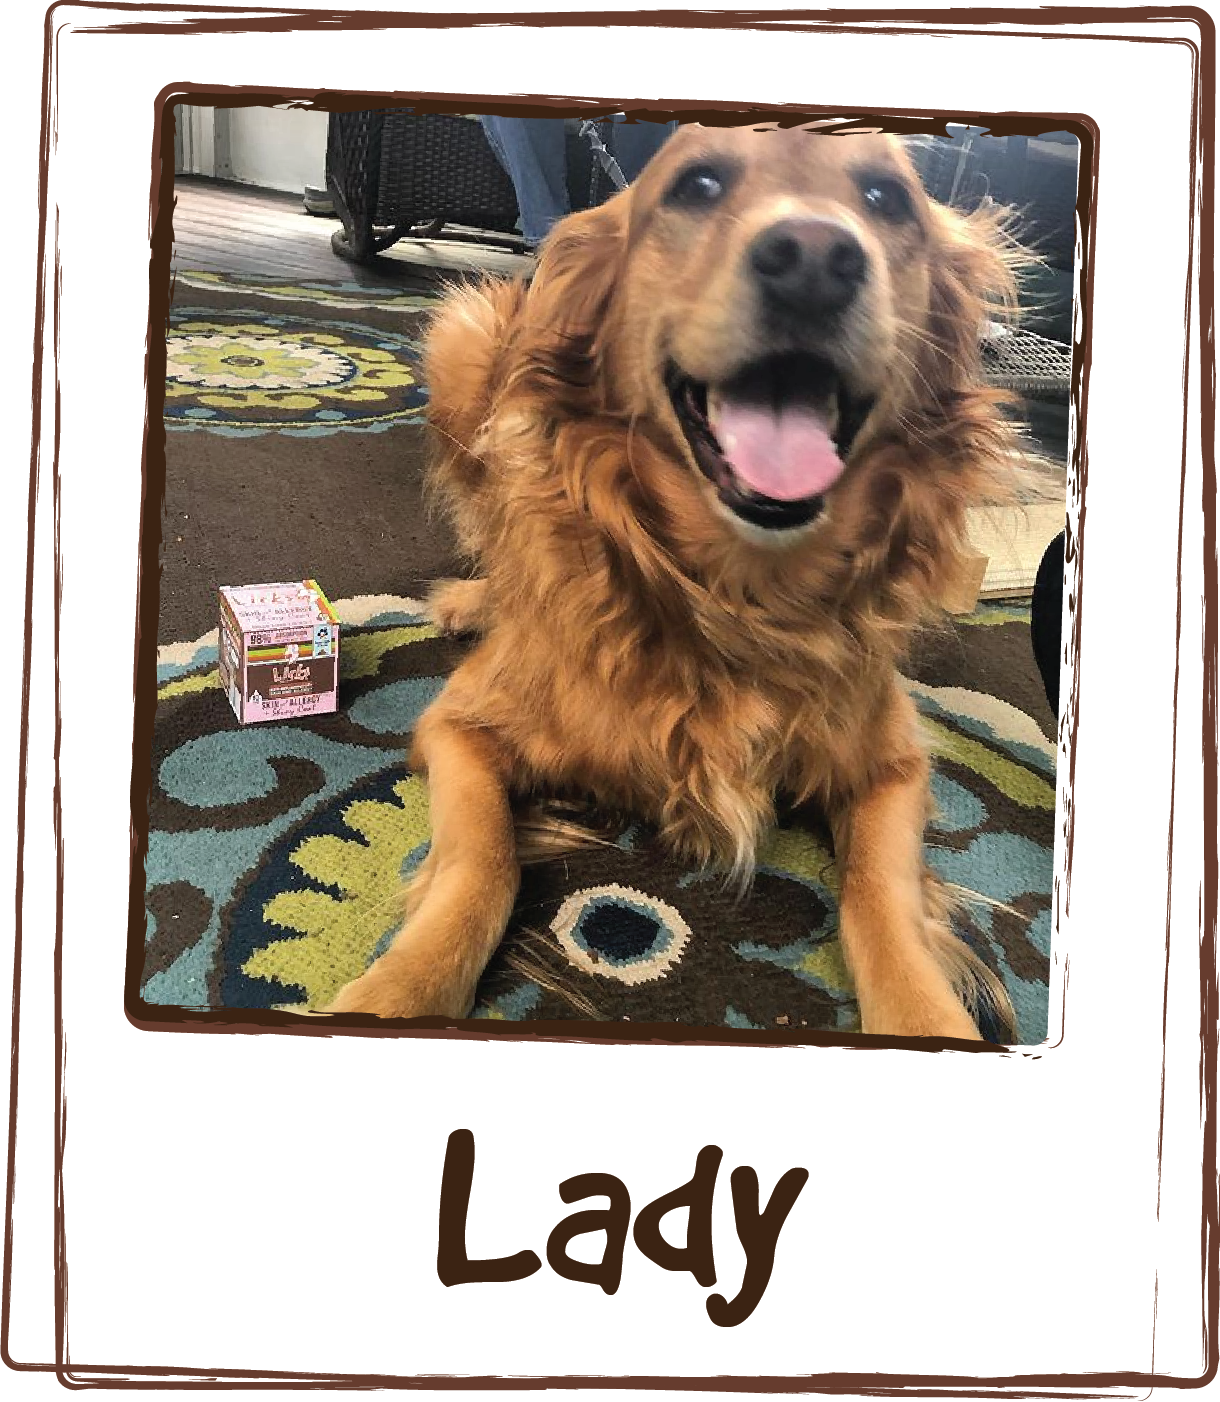  “Lady has been suffering with bad skin allergies for years and it seems to be extra worse this year. She gets hots spots, you name it. I have tried everything. It wasn’t until she started LICKS a few months ago that the rashes started to disappear. 